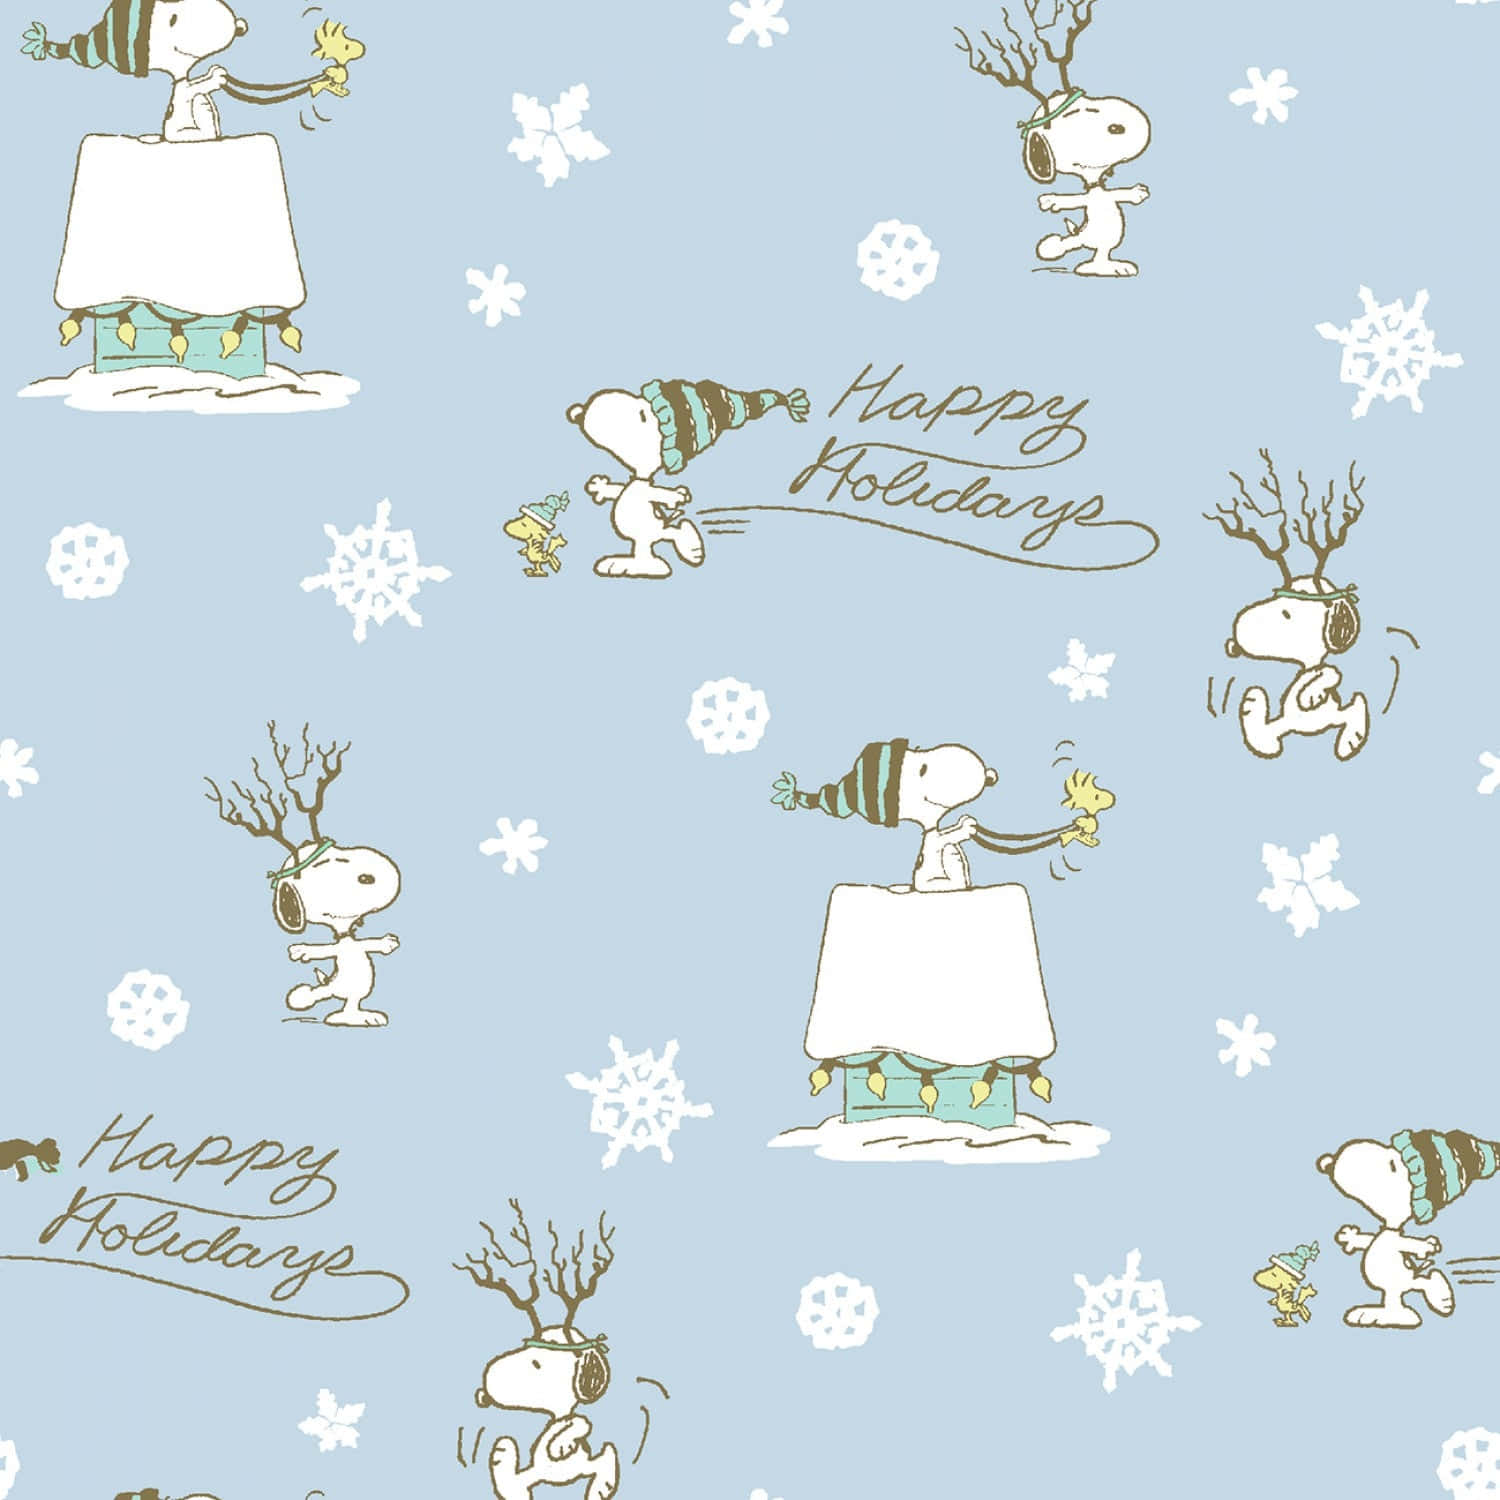 Celebrate The Winter Holidays With The Peanuts Gang Wallpaper